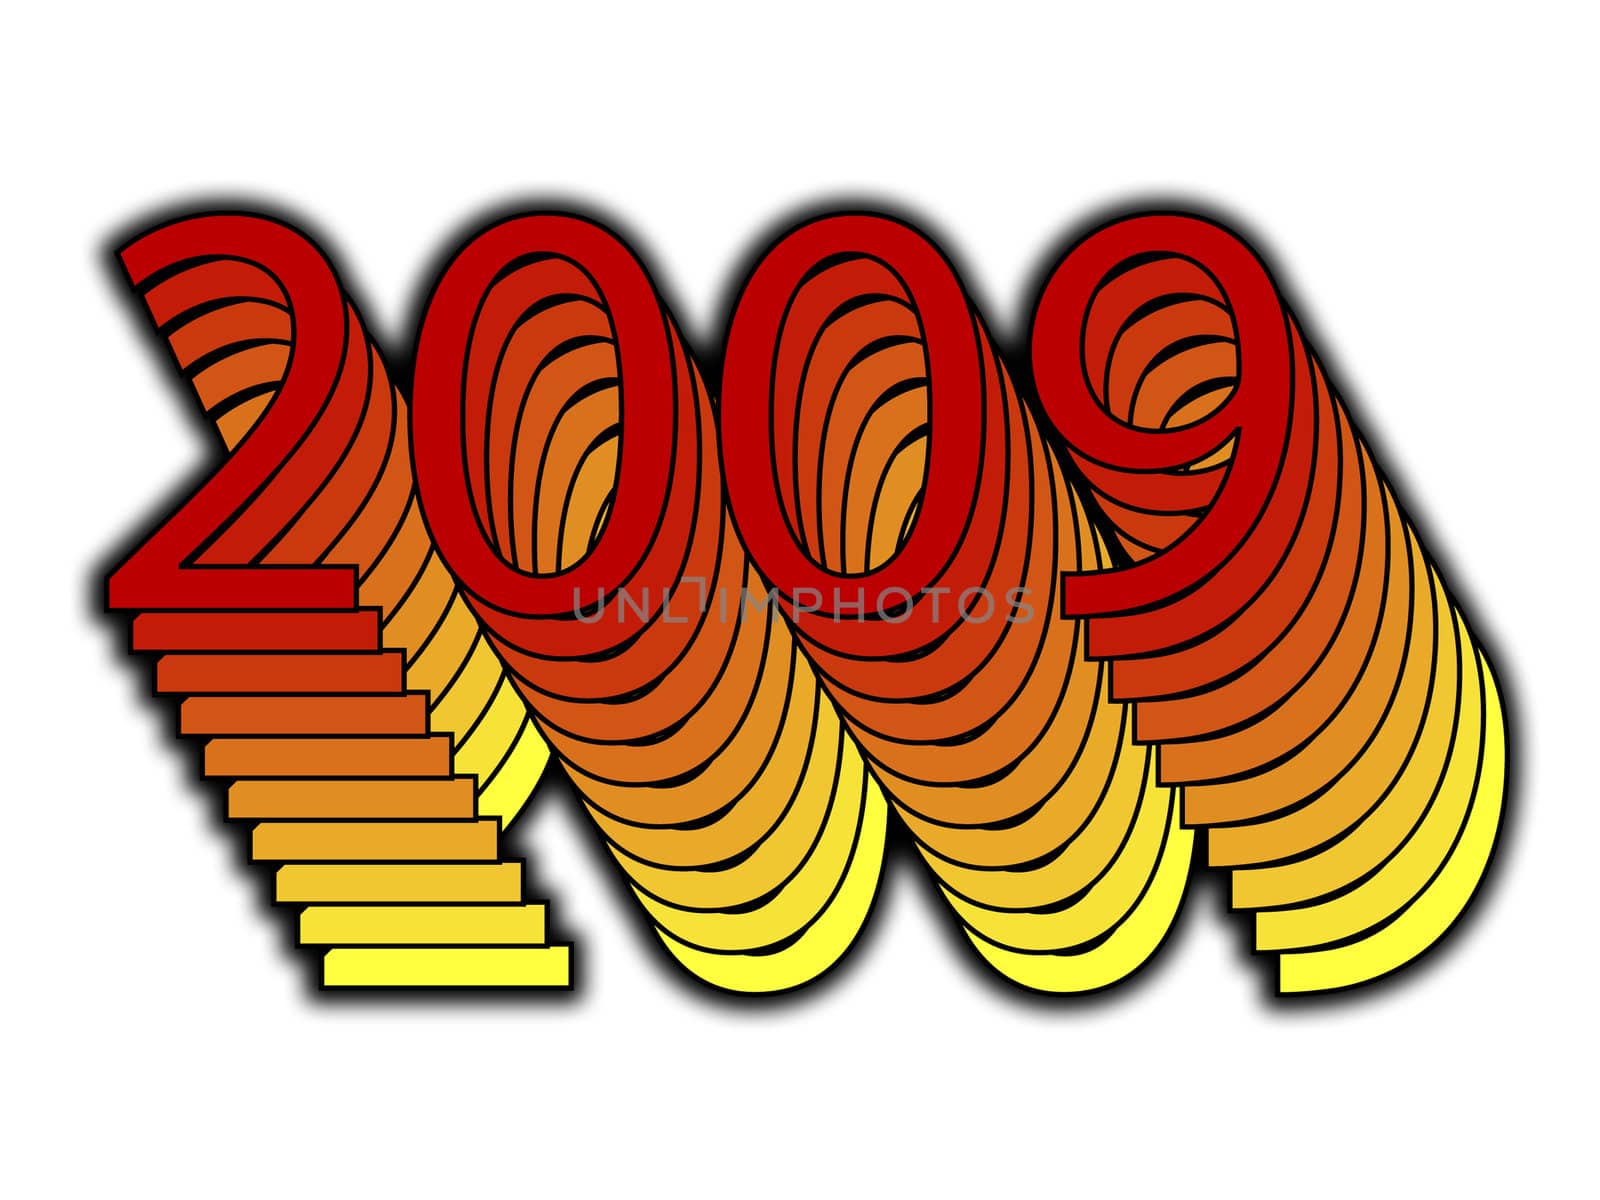 A simple image representing the new year 2009.